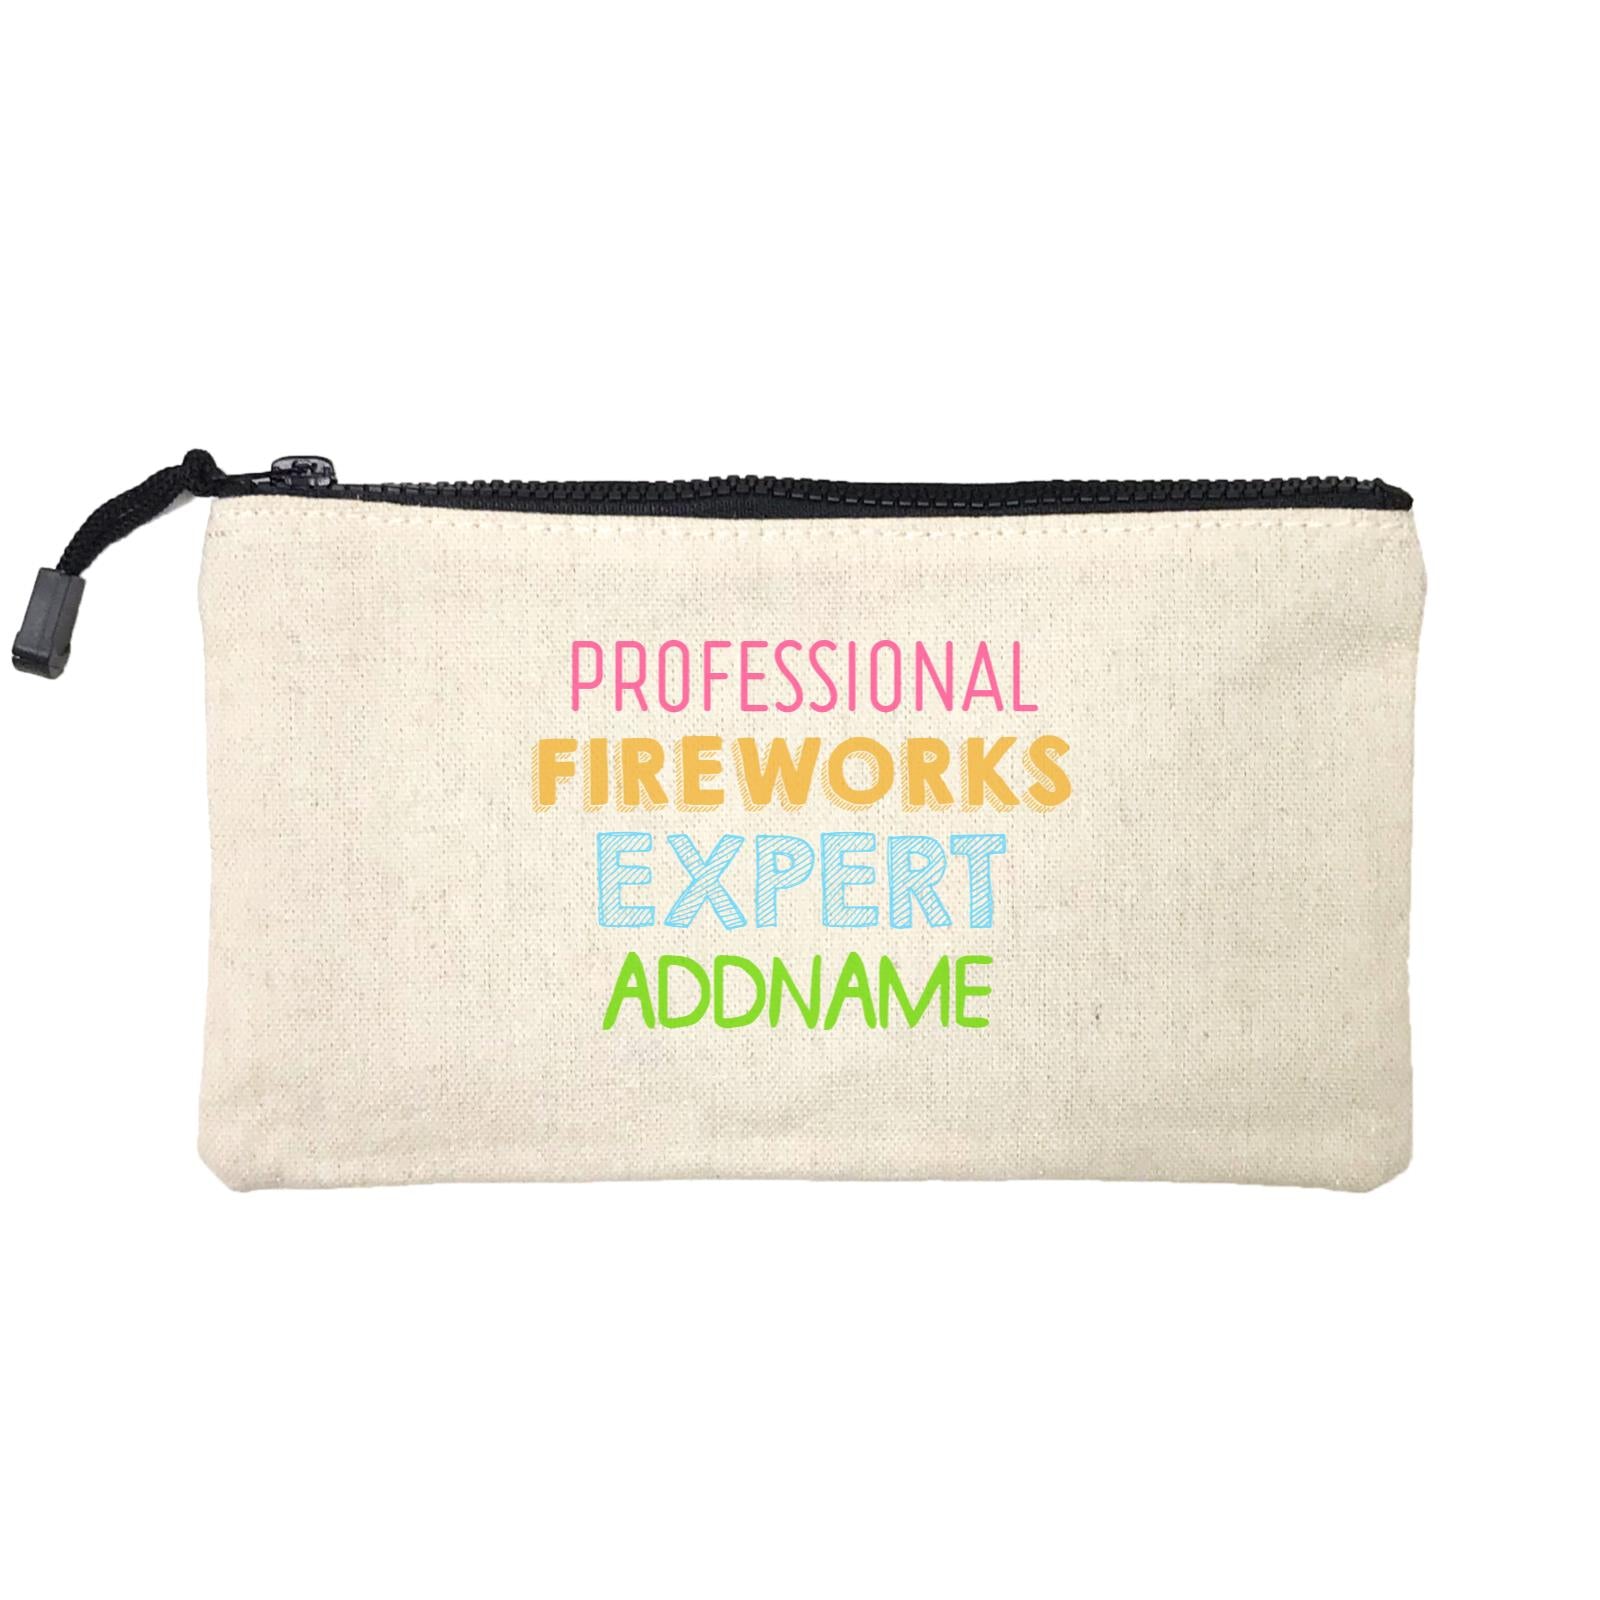 Professional Fireworks Expert Addname Mini Accessories Stationery Pouch